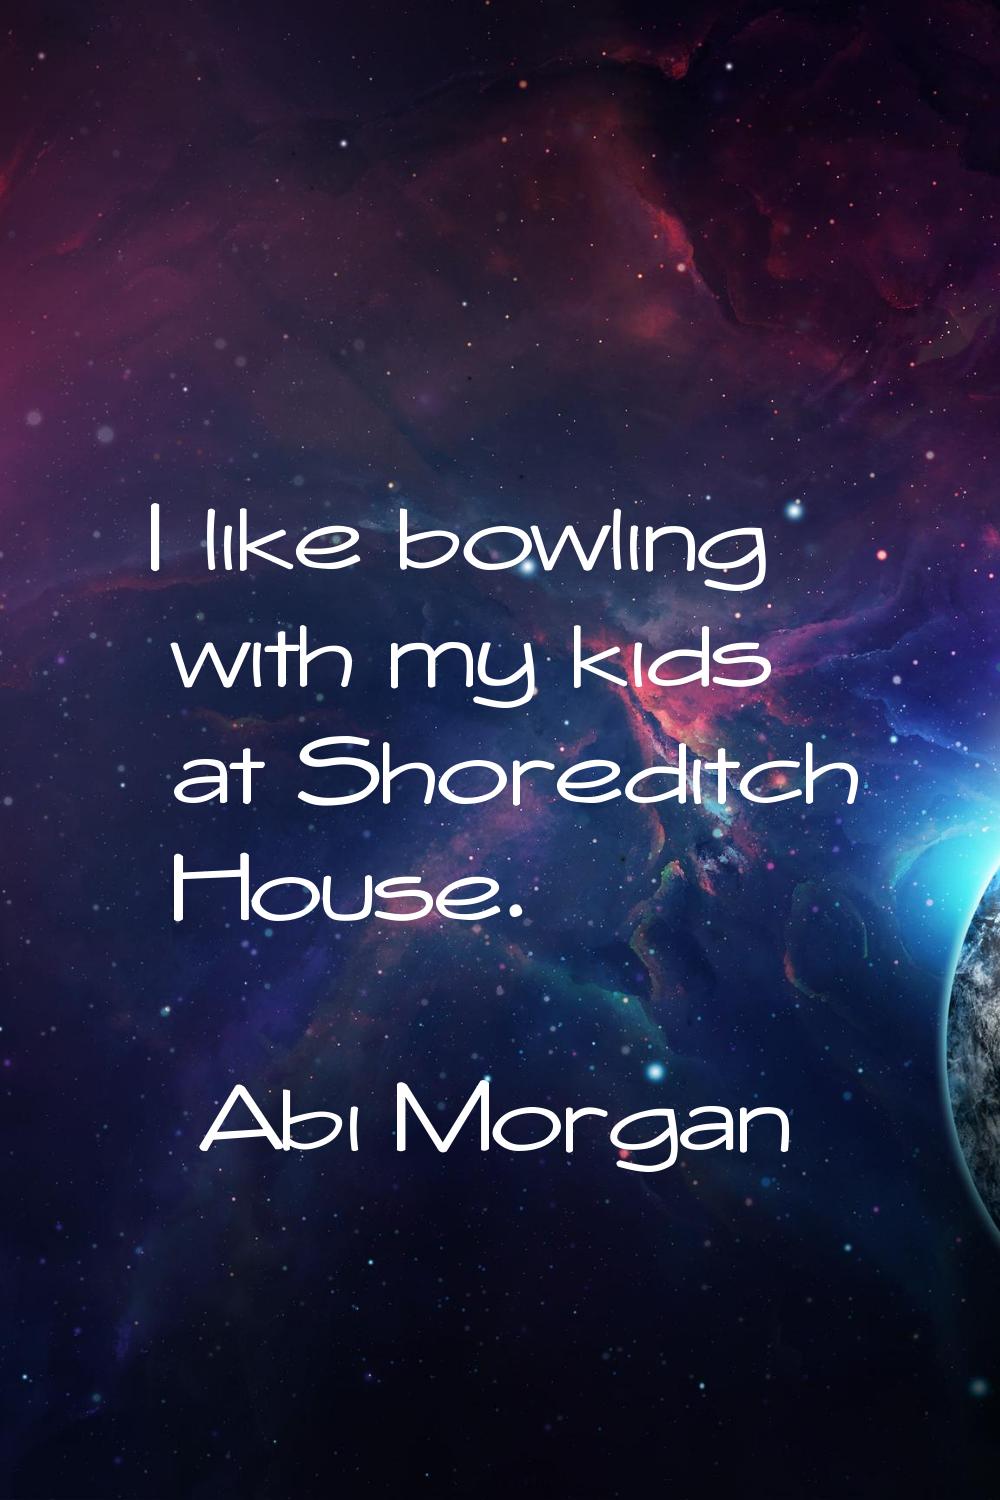 I like bowling with my kids at Shoreditch House.